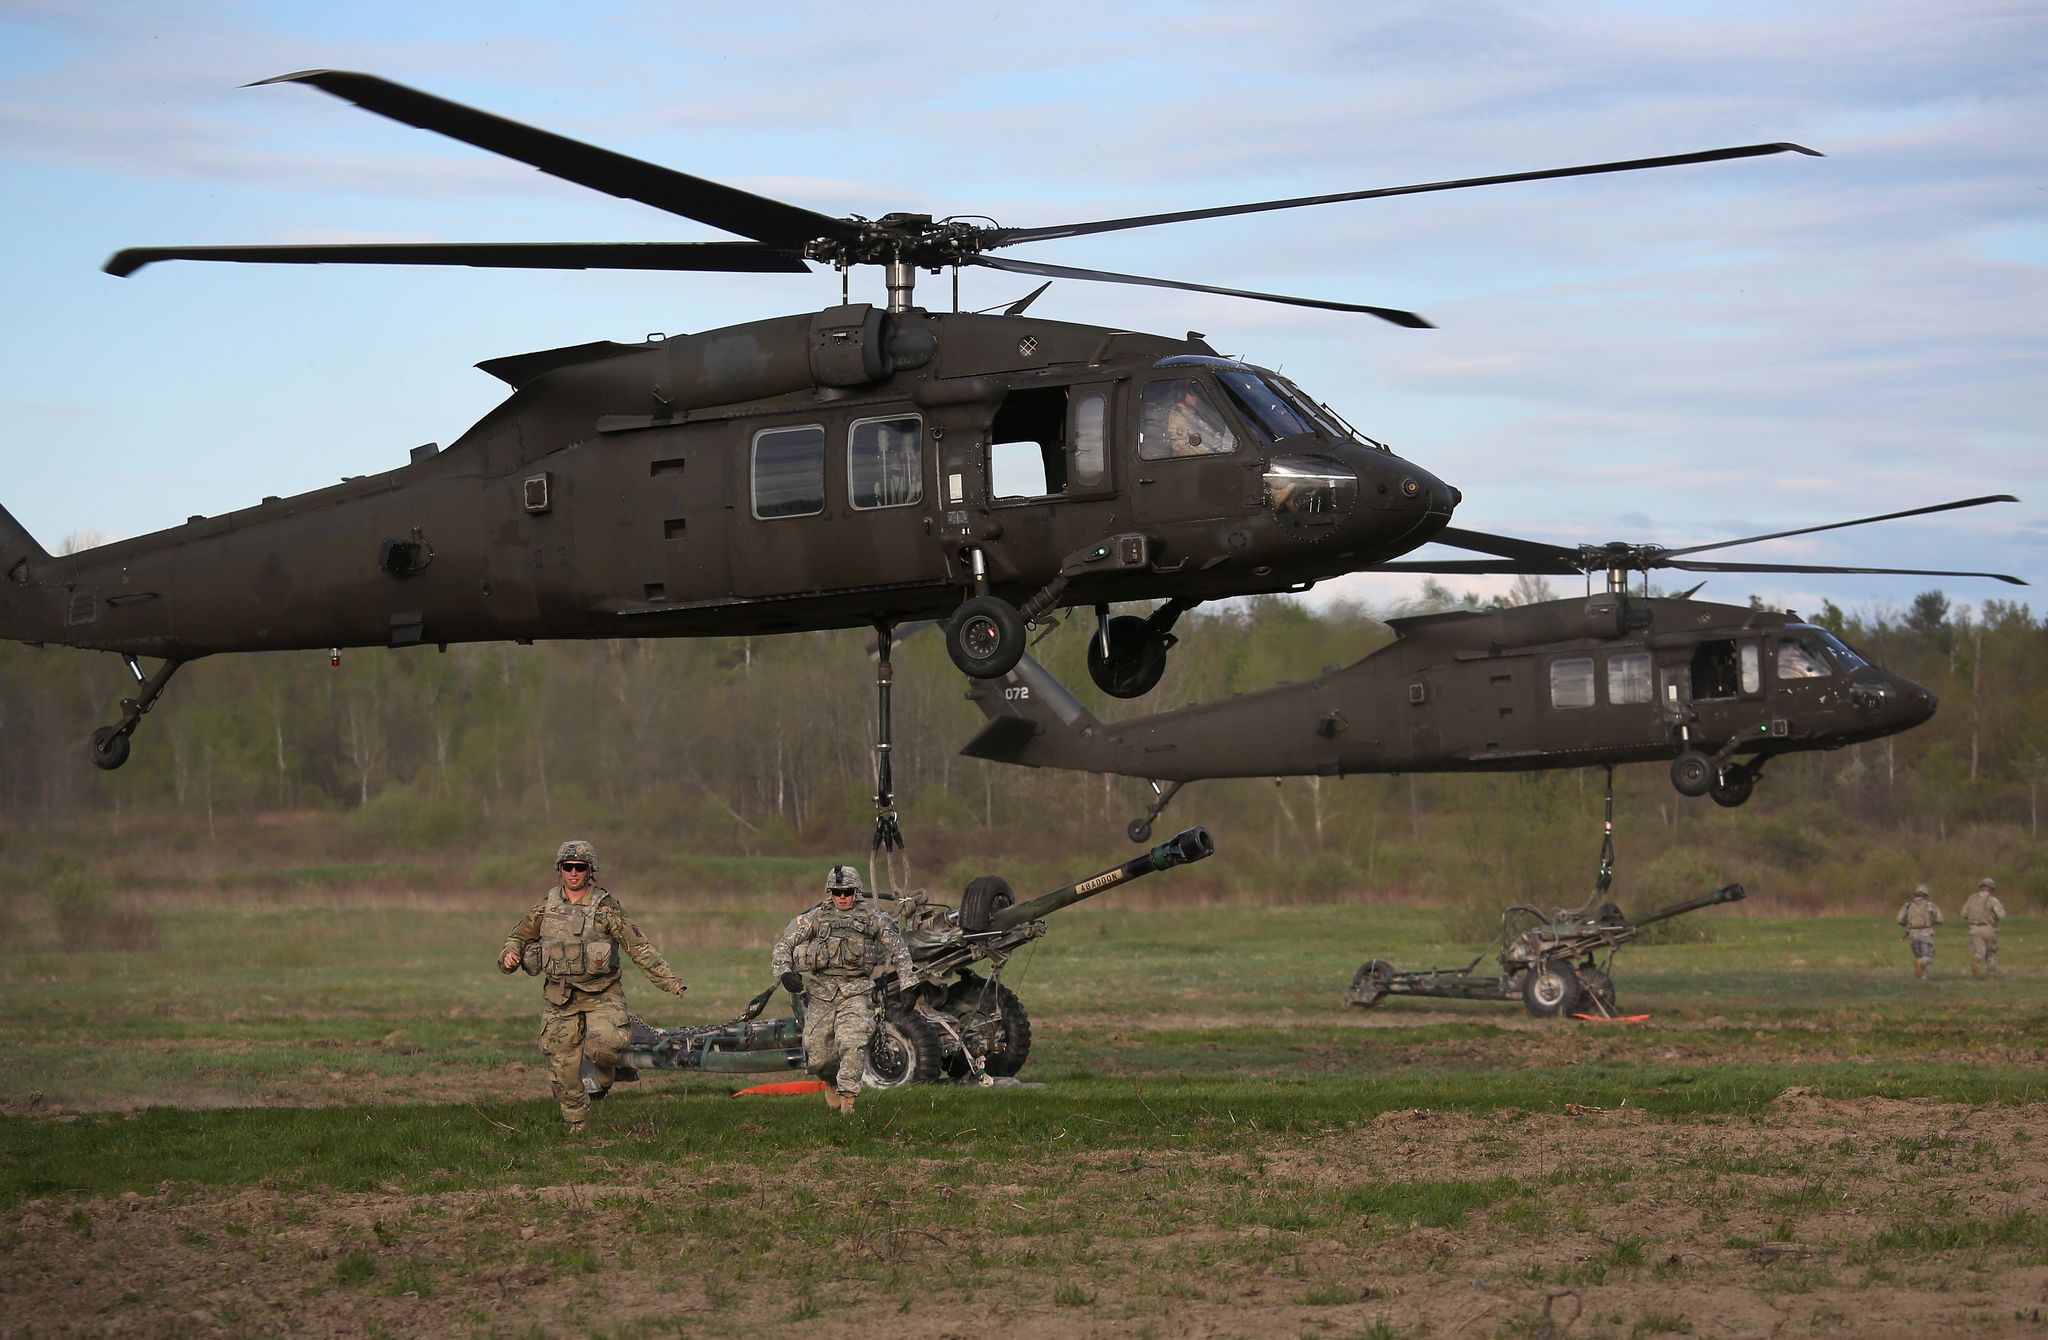 10th mountain troops train with black helicopters and 105 millimeter howitzers